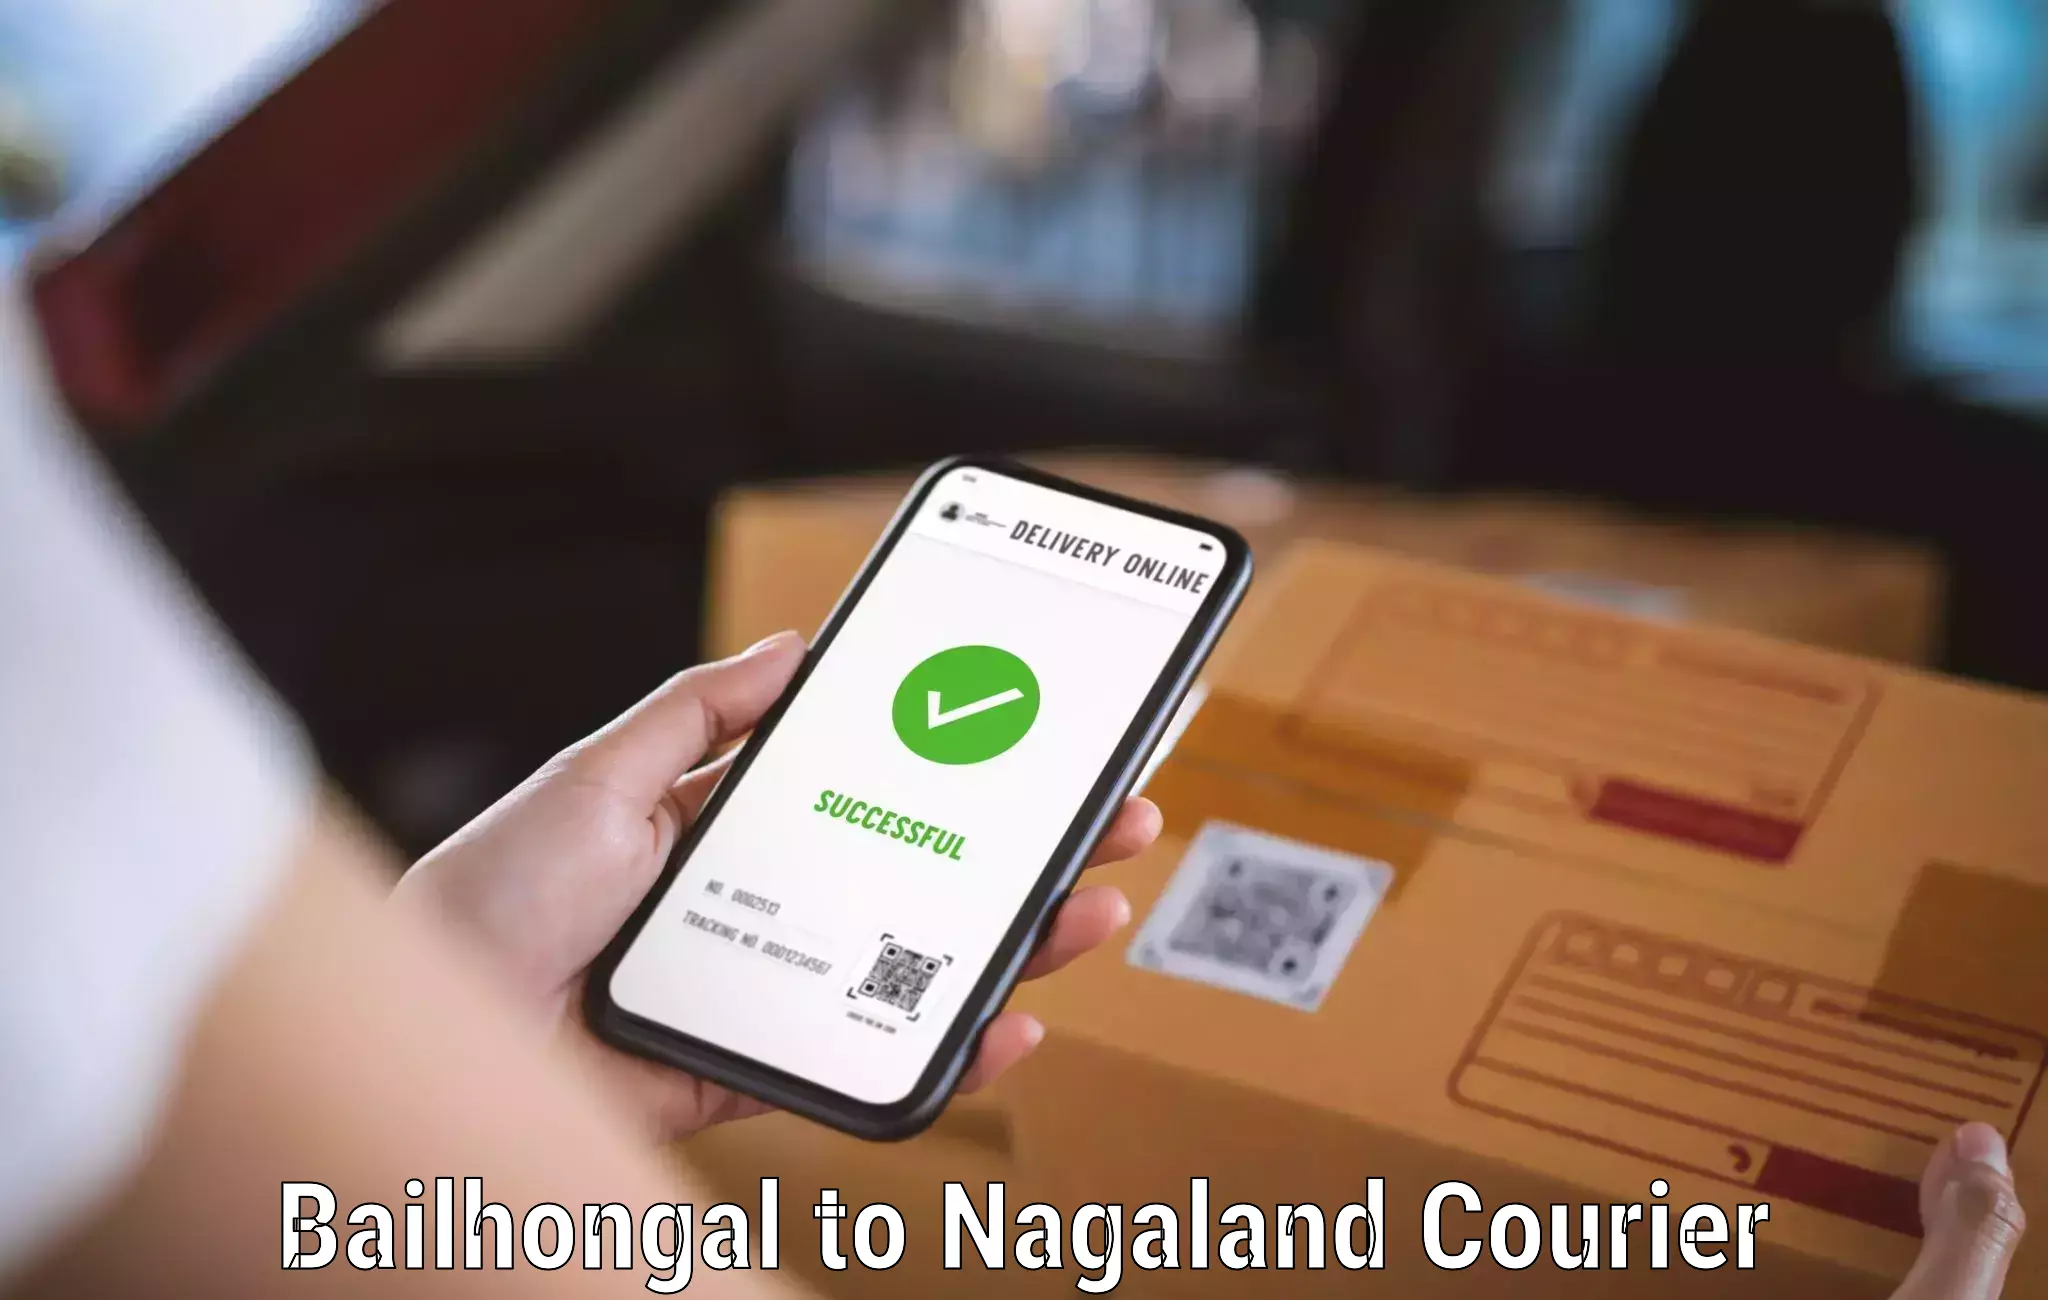 Cost-effective shipping solutions Bailhongal to Nagaland